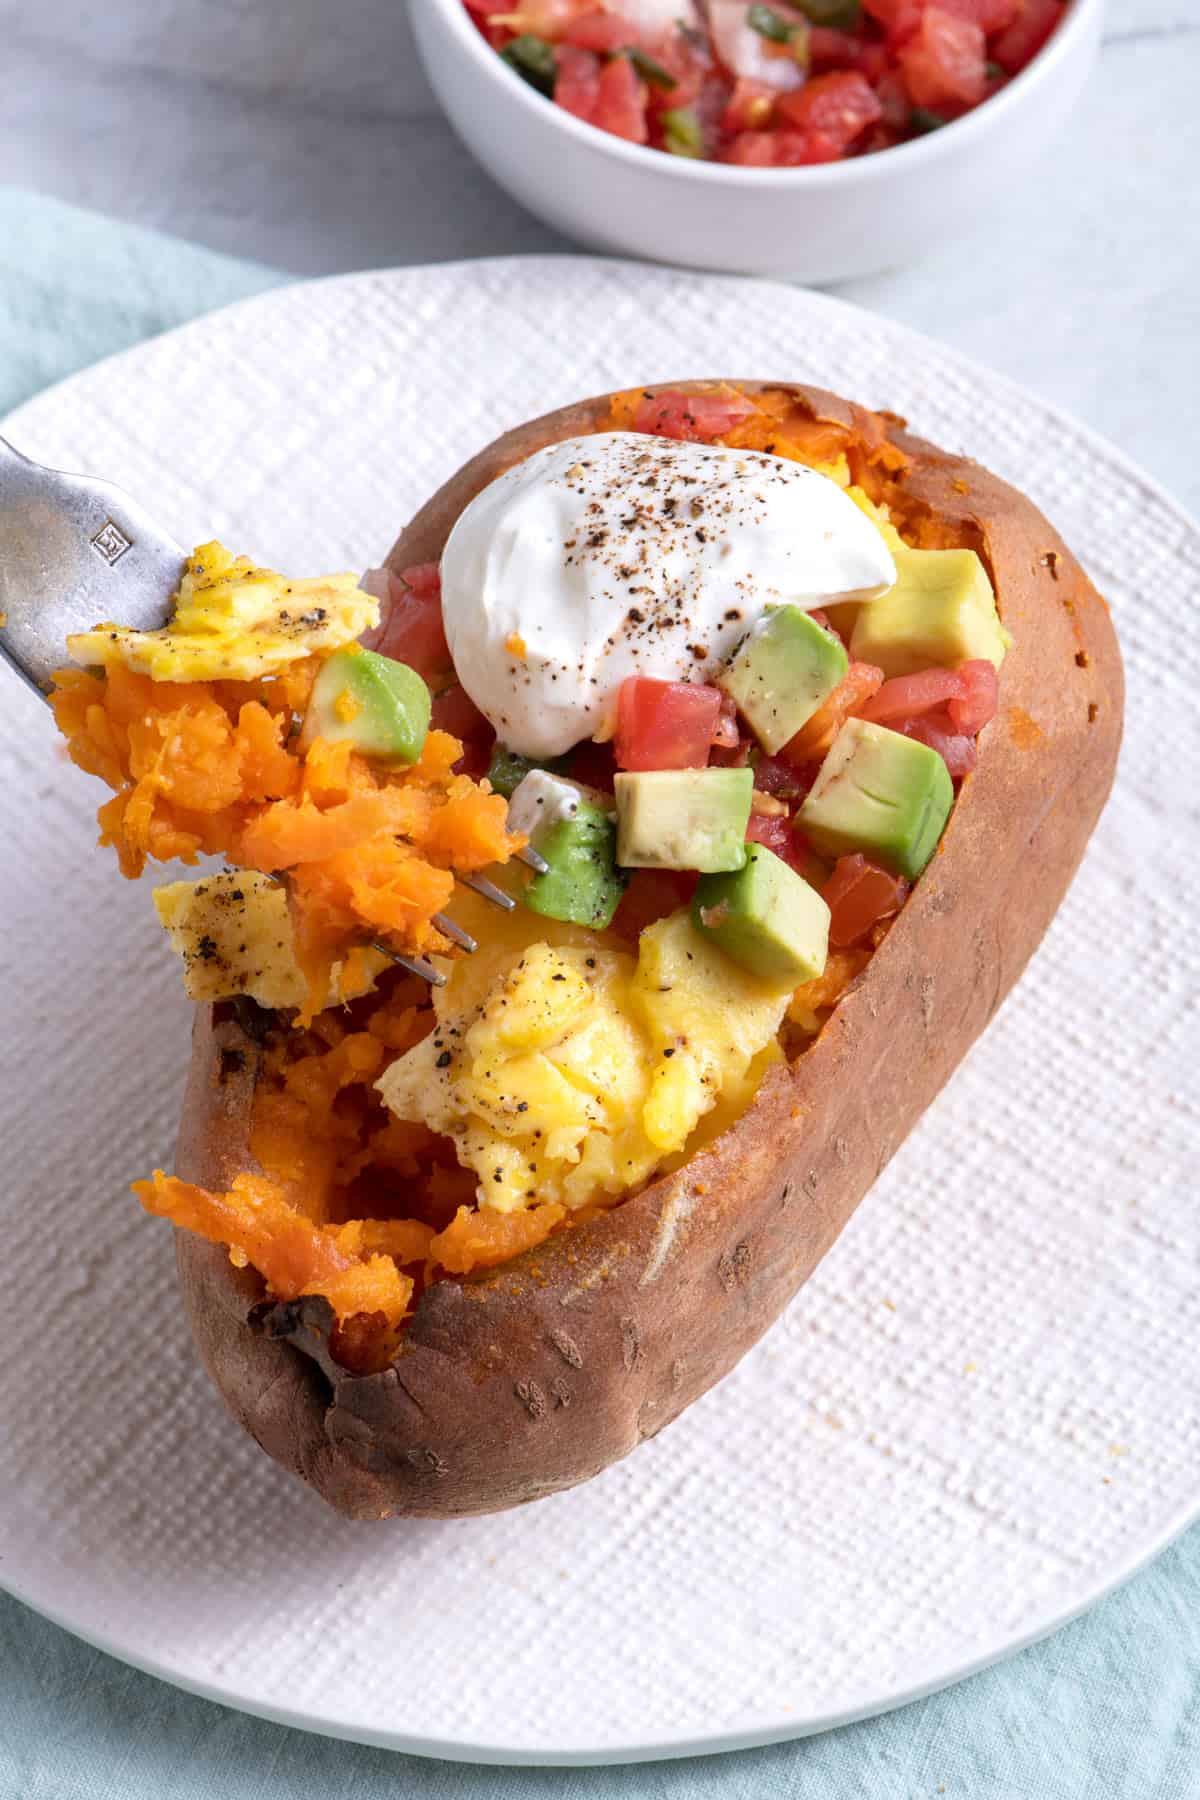 Fork digging into baked sweet potatoes loaded with eggs and veggies